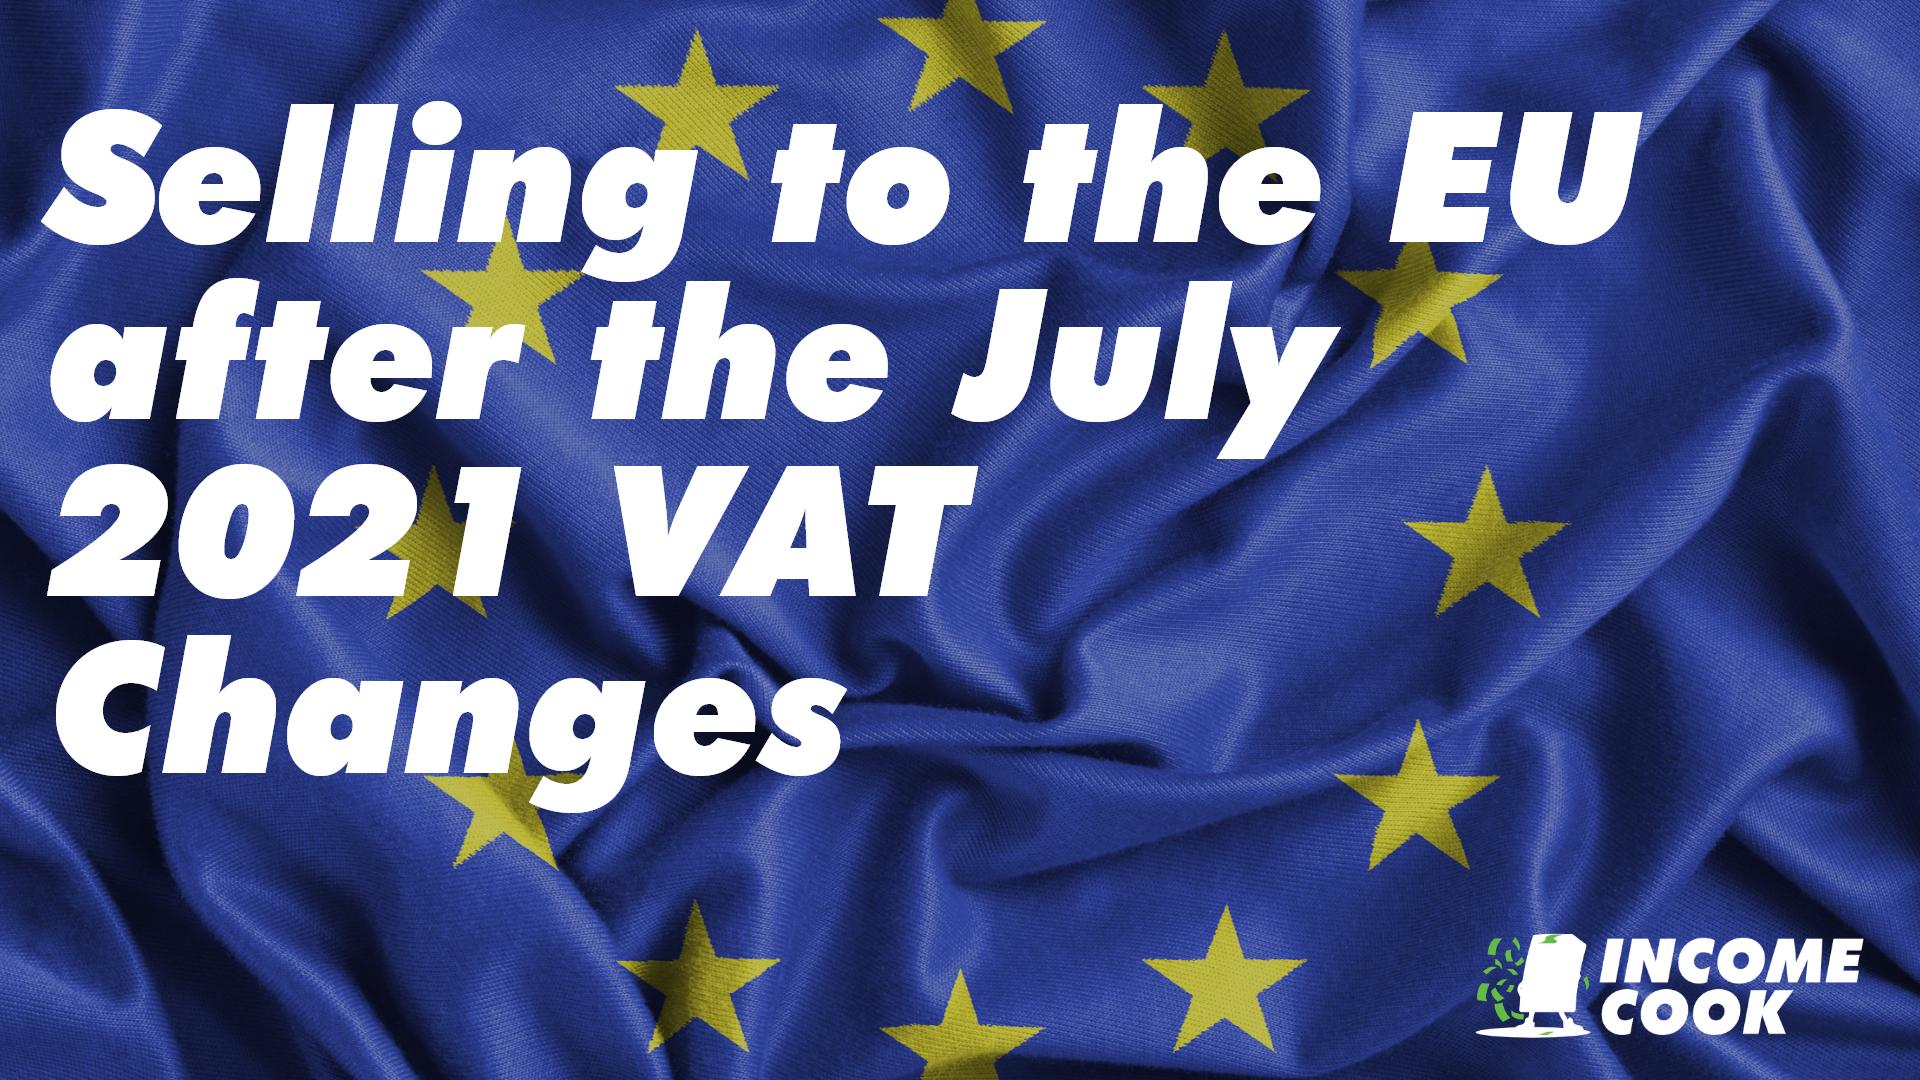 Selling to the EU After July 2021 VAT Changes